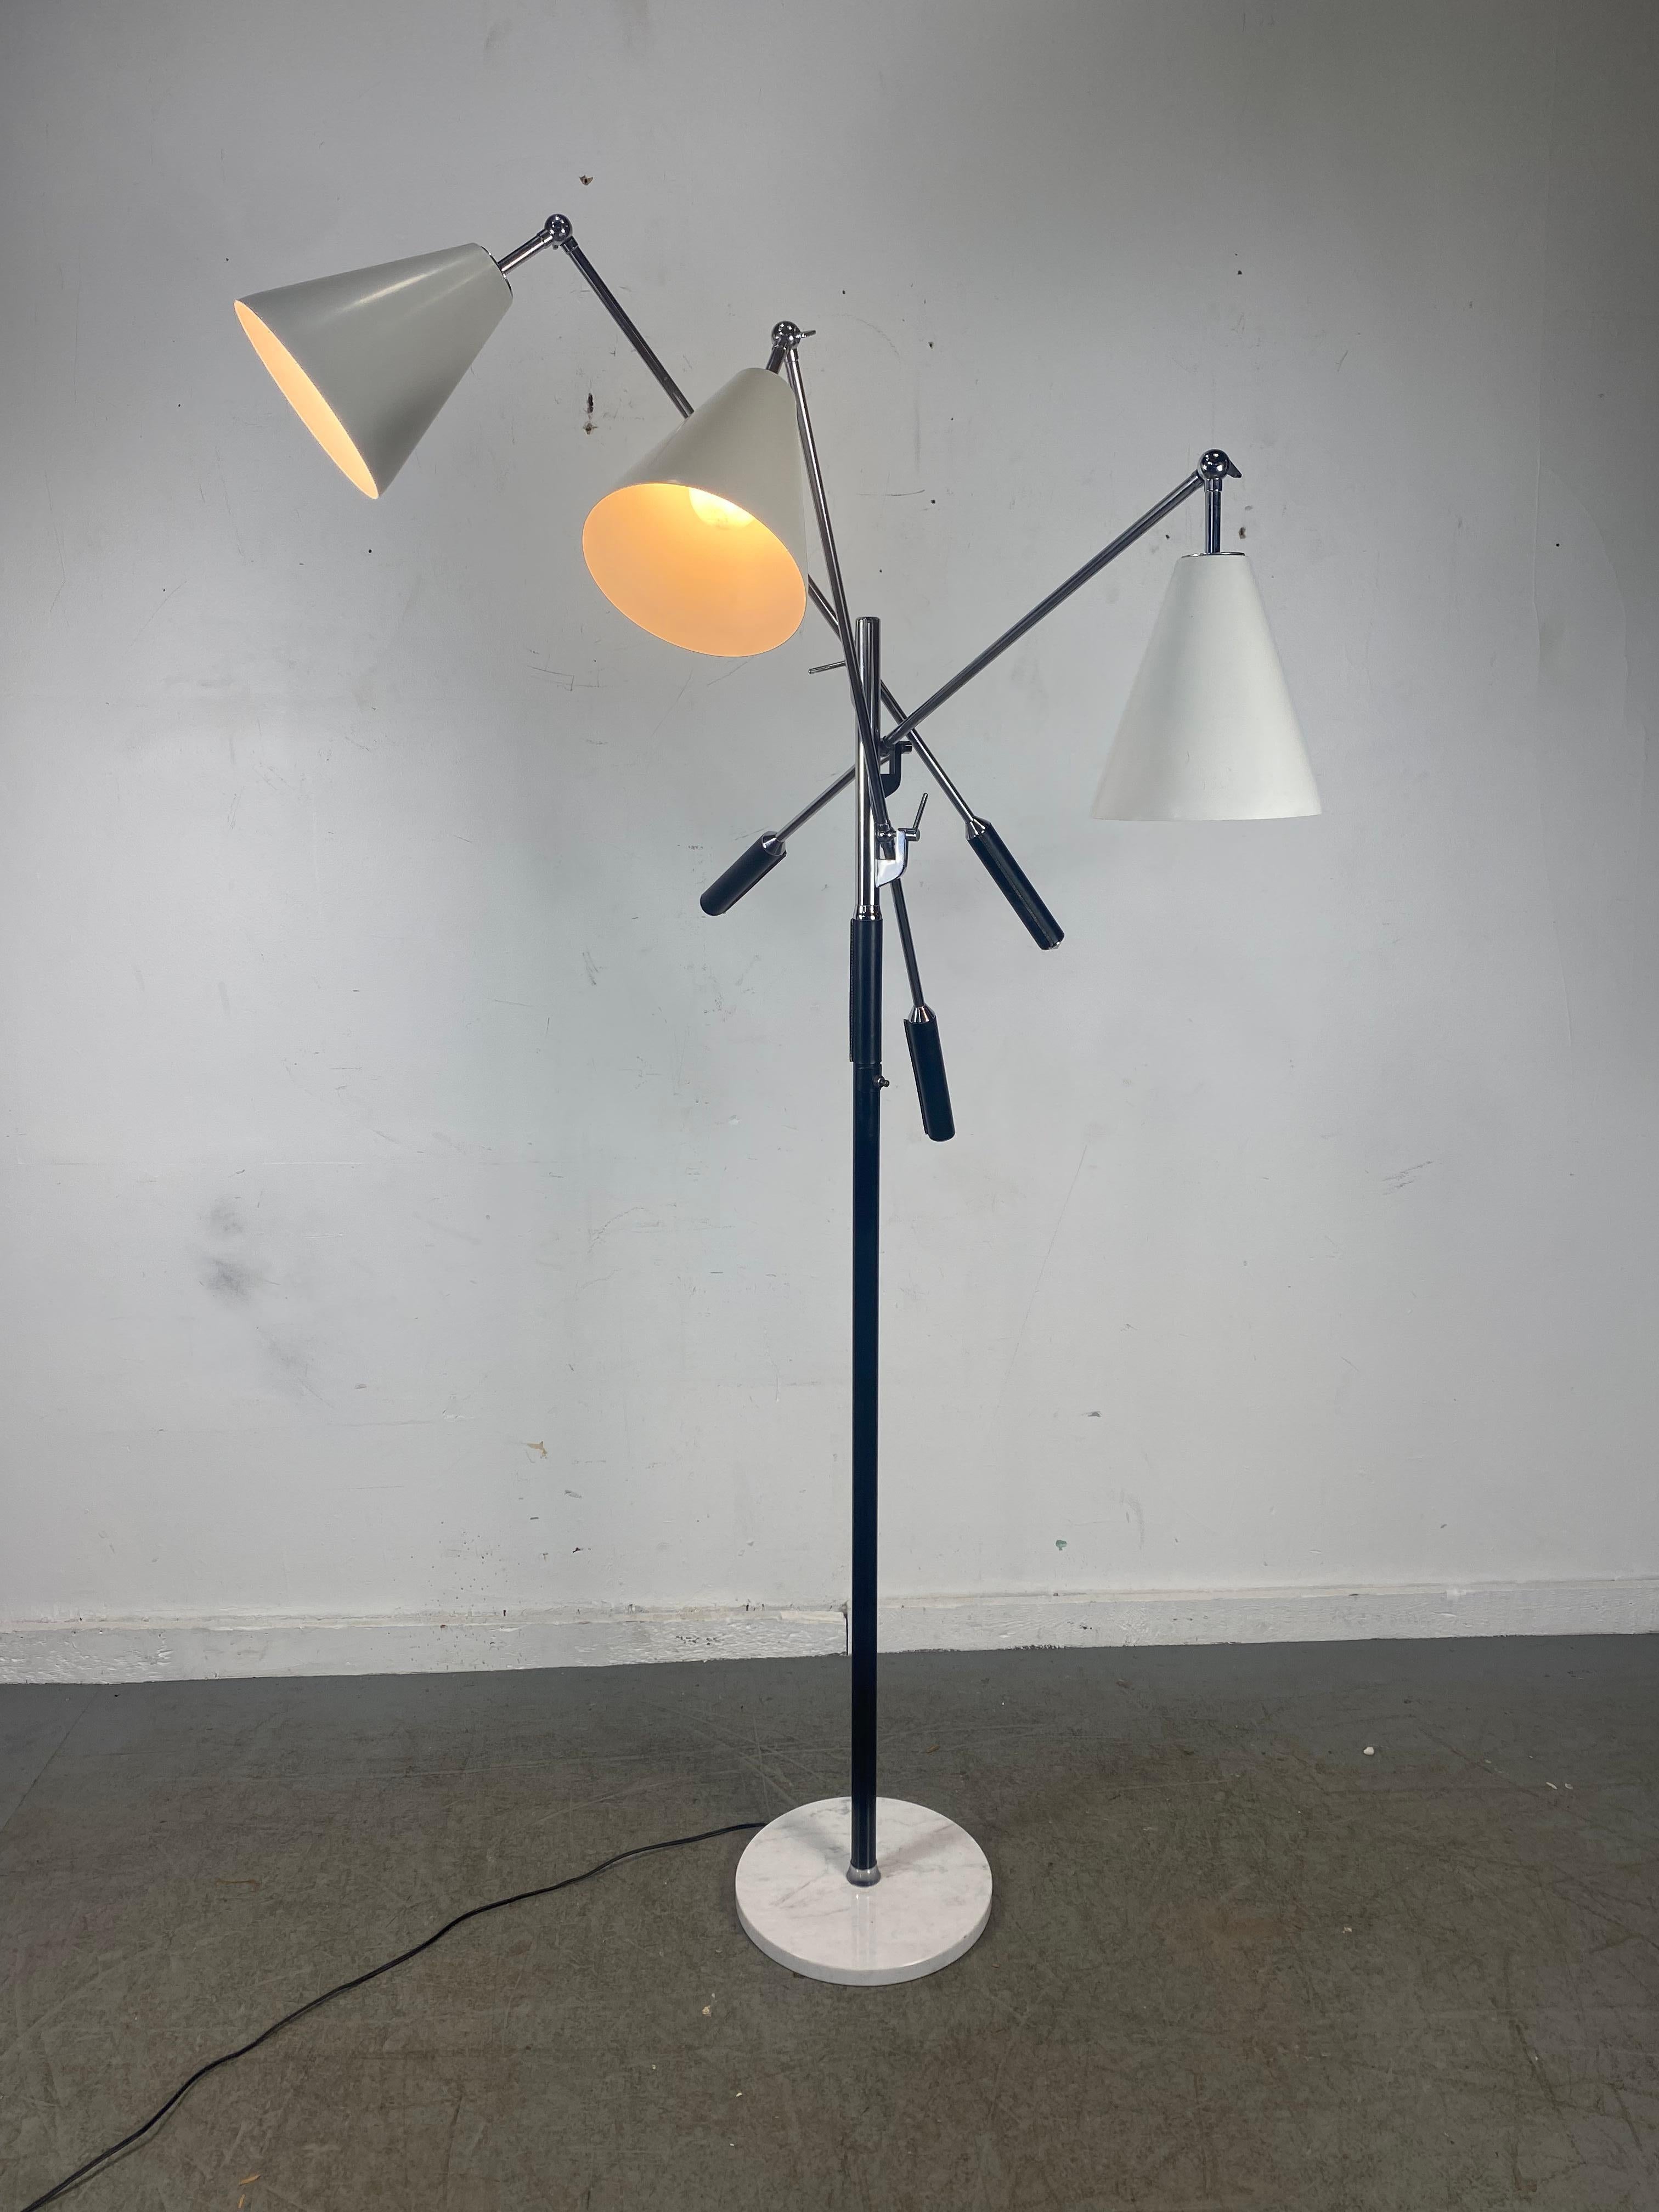 Mid-Century Modern triple arm floor lamp designed by Angelo Lelli, made in Italy, Classic version, white cone shades. Chrome standard, Leather wrapped weighted ends, leather standard, stunning white carrara marble base. Lamp in amazing original